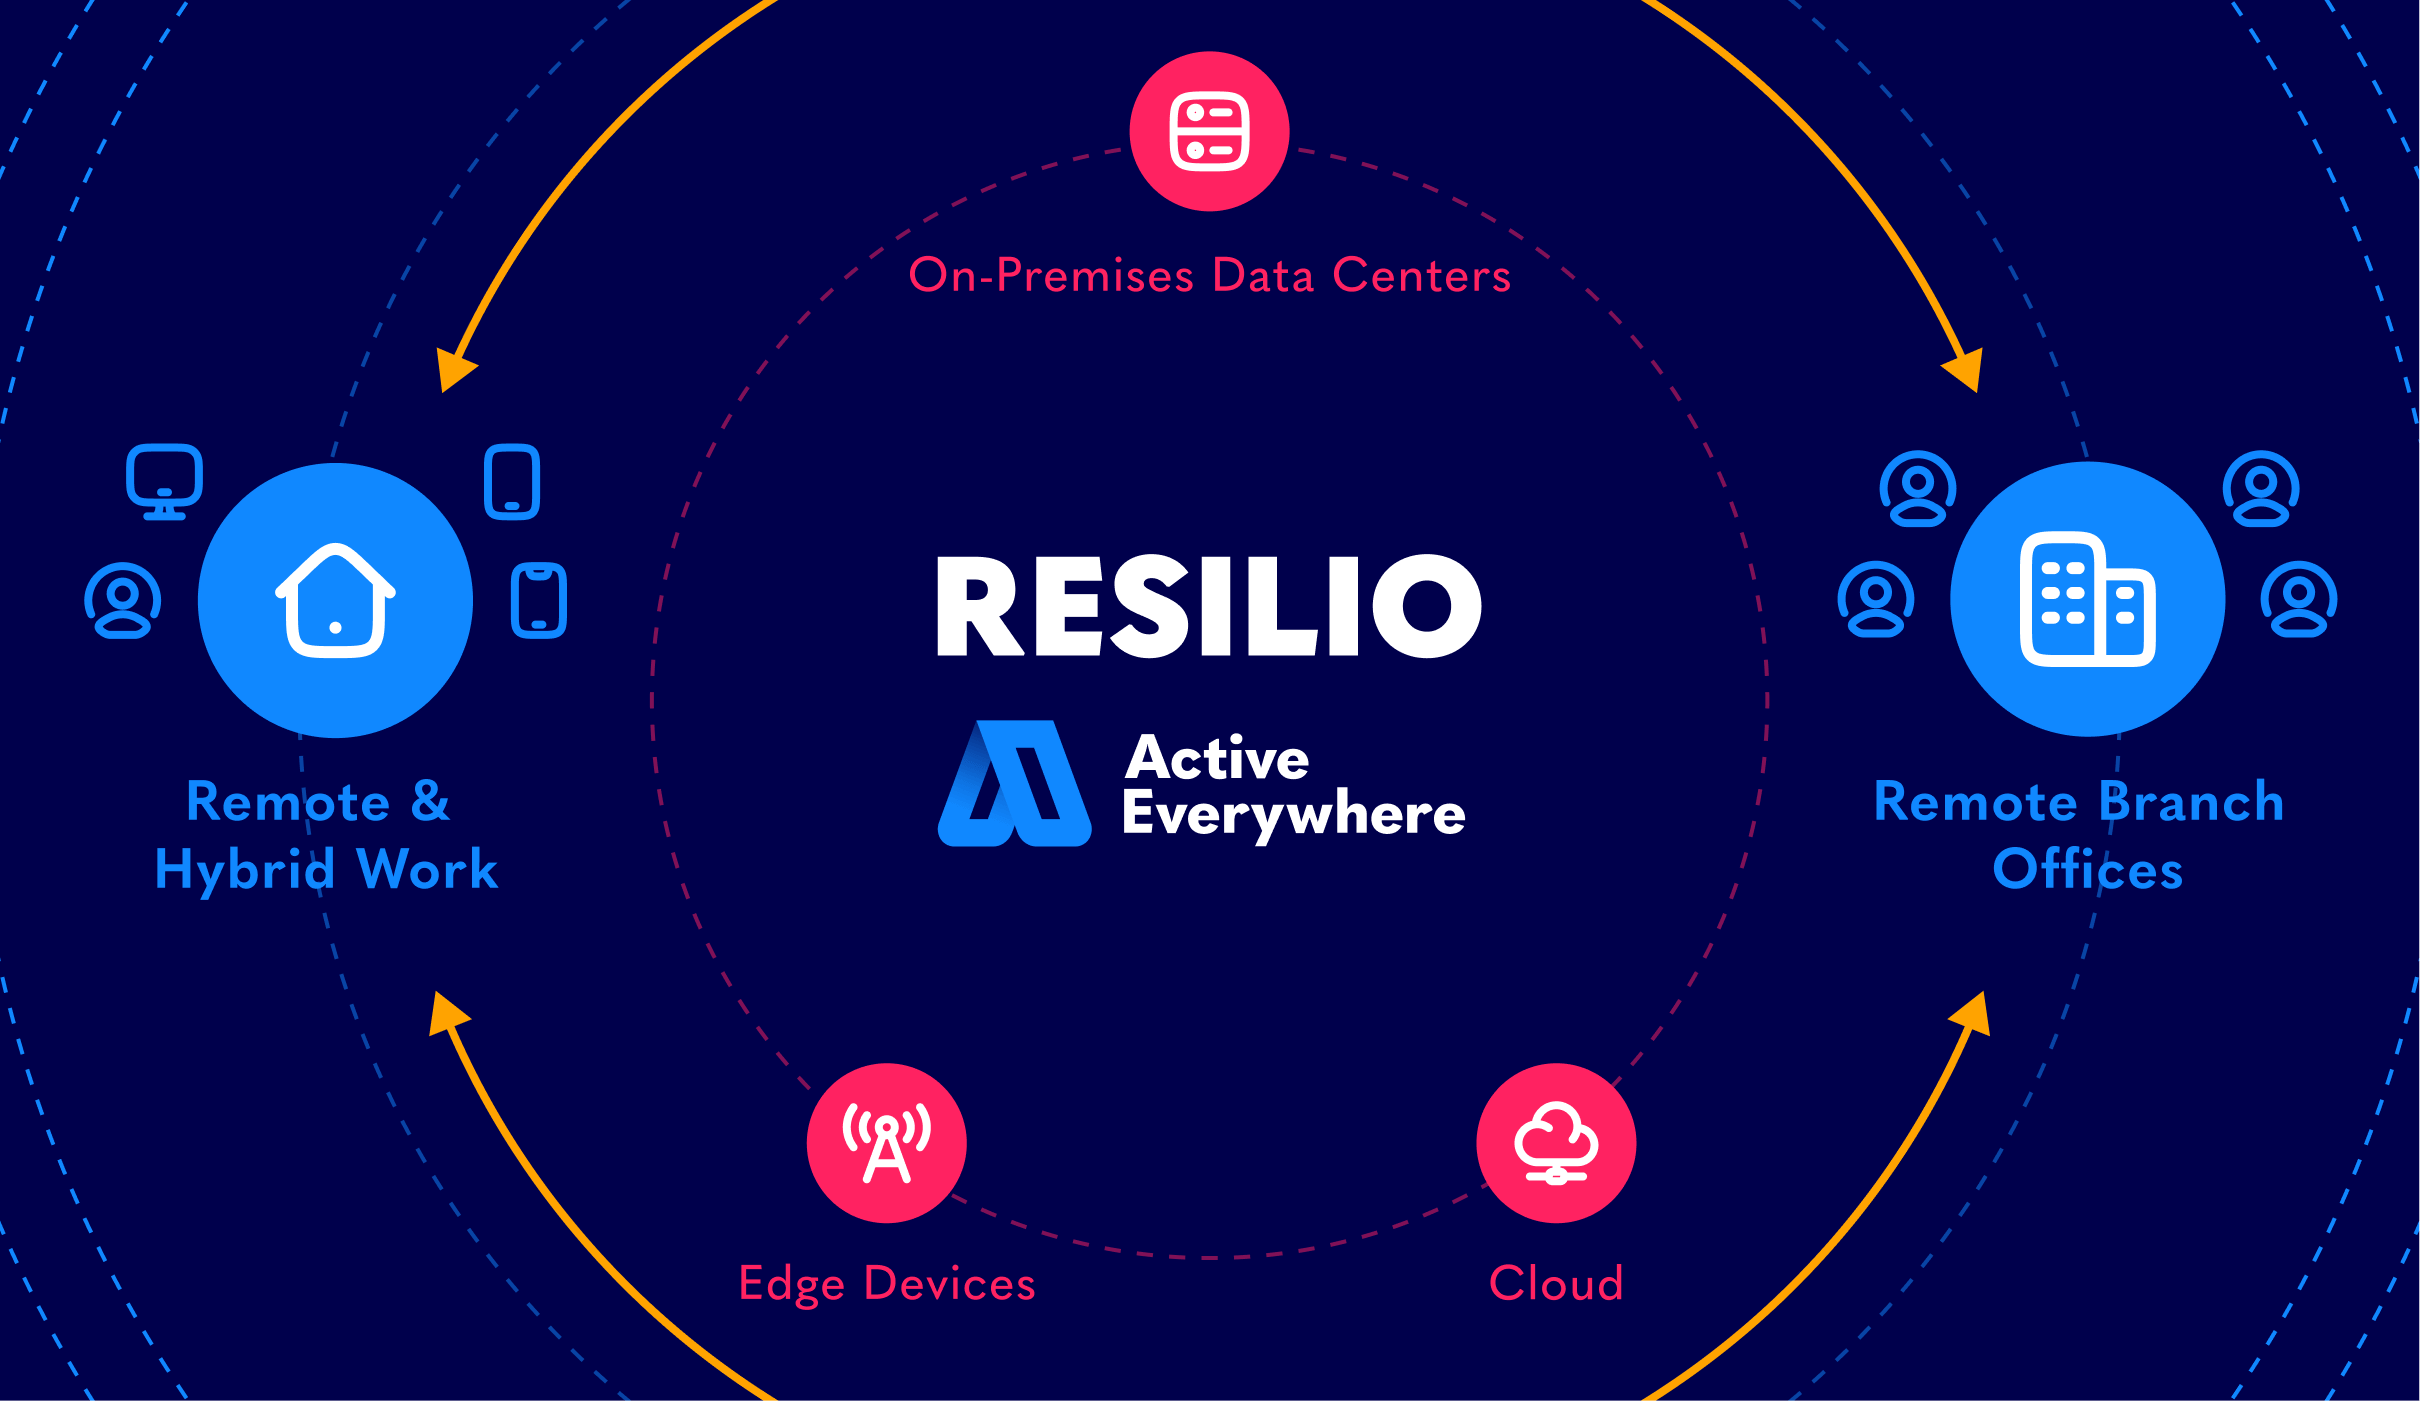 Introducing Active Everywhere. Learn about our all-in-one platform that delivers active, current, and accessible file data everywhere.